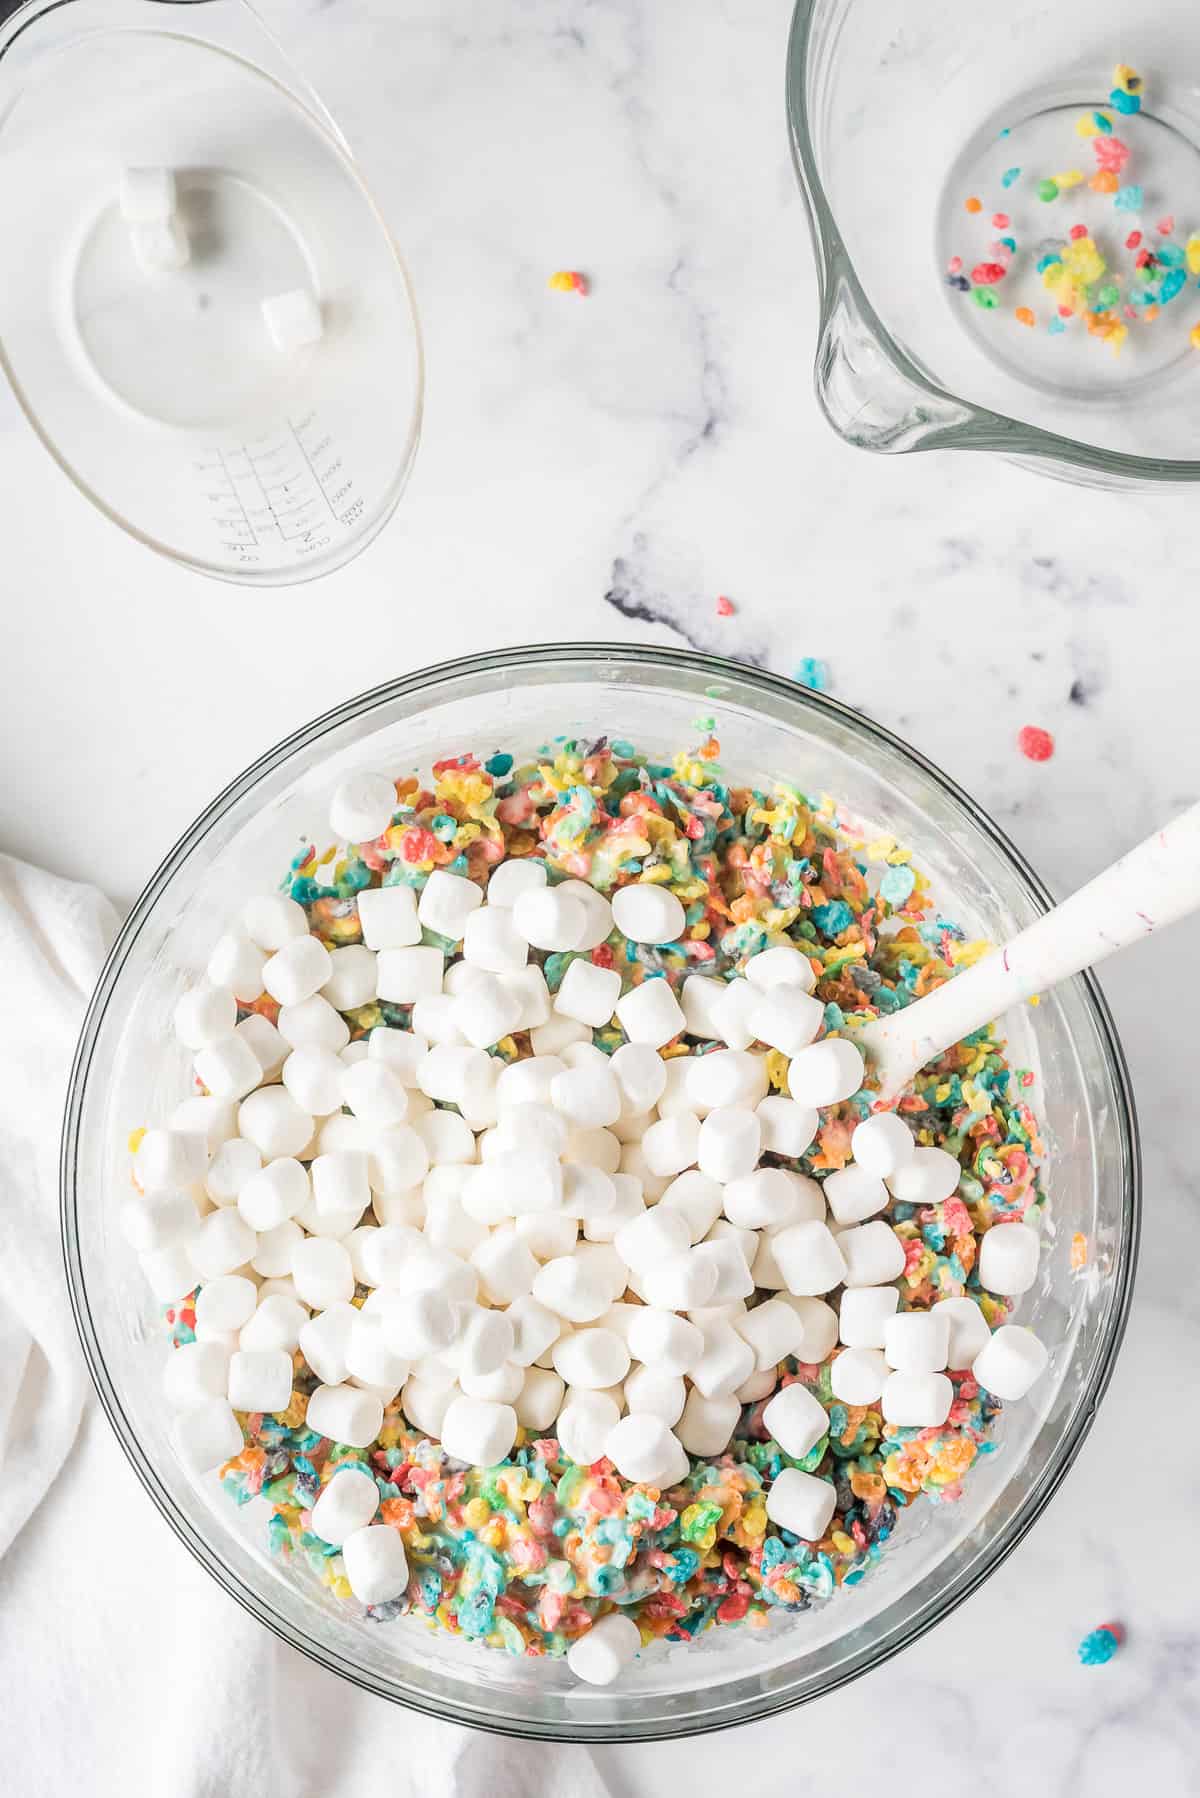 Add in 2 cups of Mini Marshmallows and Mix together.